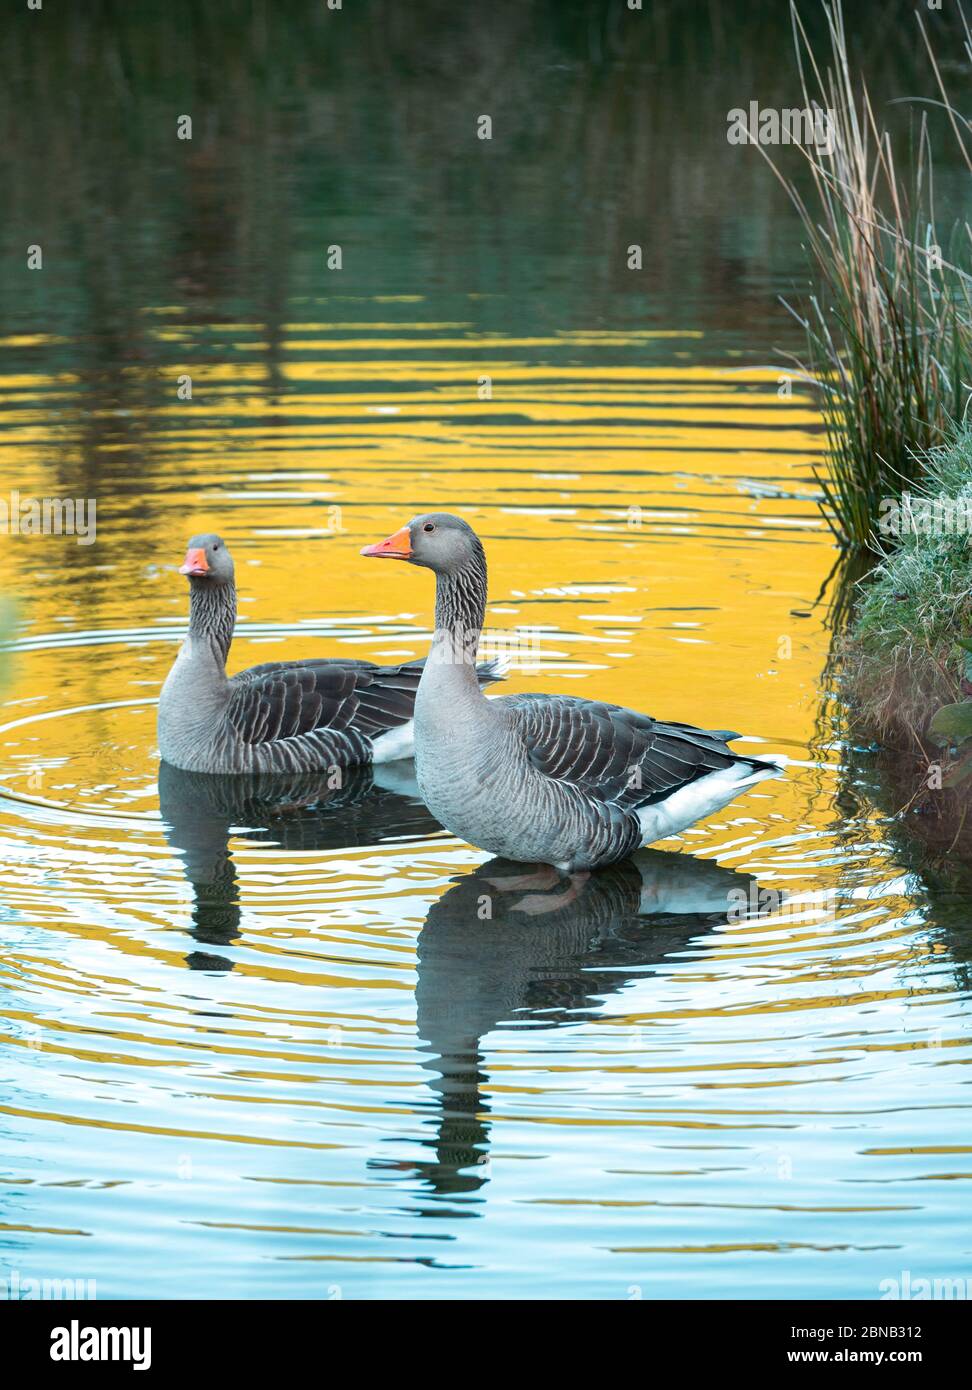 Caffrae, Scottish Borders, UK. 14th May, 2020. UK Weather, wildlife, nature. Image shows greylag geese out for an early morning paddle as the sunlight casts colourful reflections on the water of a pond at Caffrae in the Scottish Borders. The greylag goose is a species of large goose in the waterfowl family Anatidae and the type species of the genus Anser. It has mottled and barred grey and white plumage and an orange beak and pink legs. A large bird, it measures between 74 and 91 centimetres in length, with an average weight of 3.3 kilograms. Credit: phil wilkinson/Alamy Live News Stock Photo